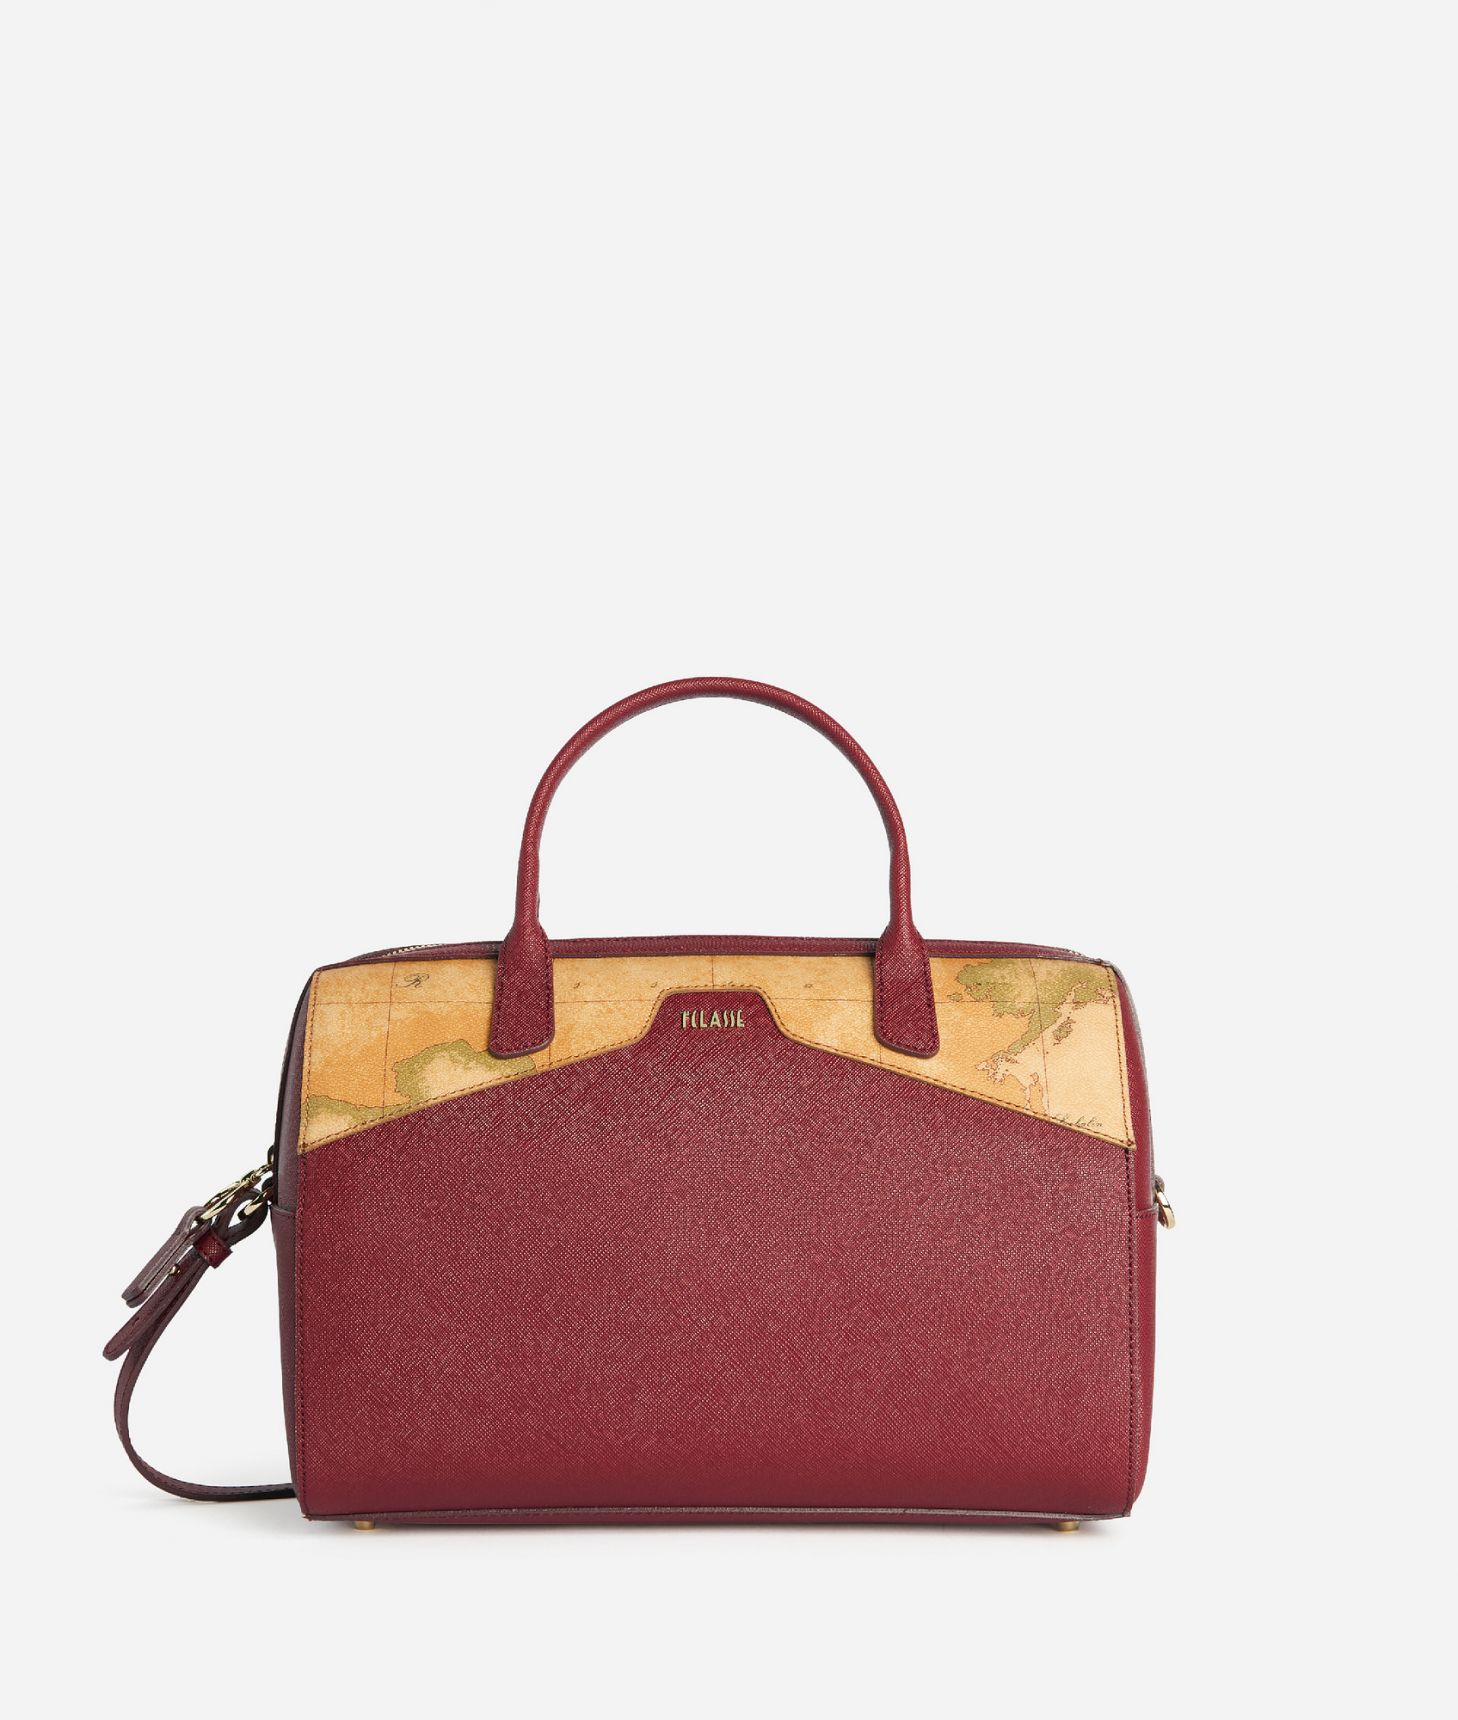 Glam City bowler bag with crossbody strap Cabernet,front